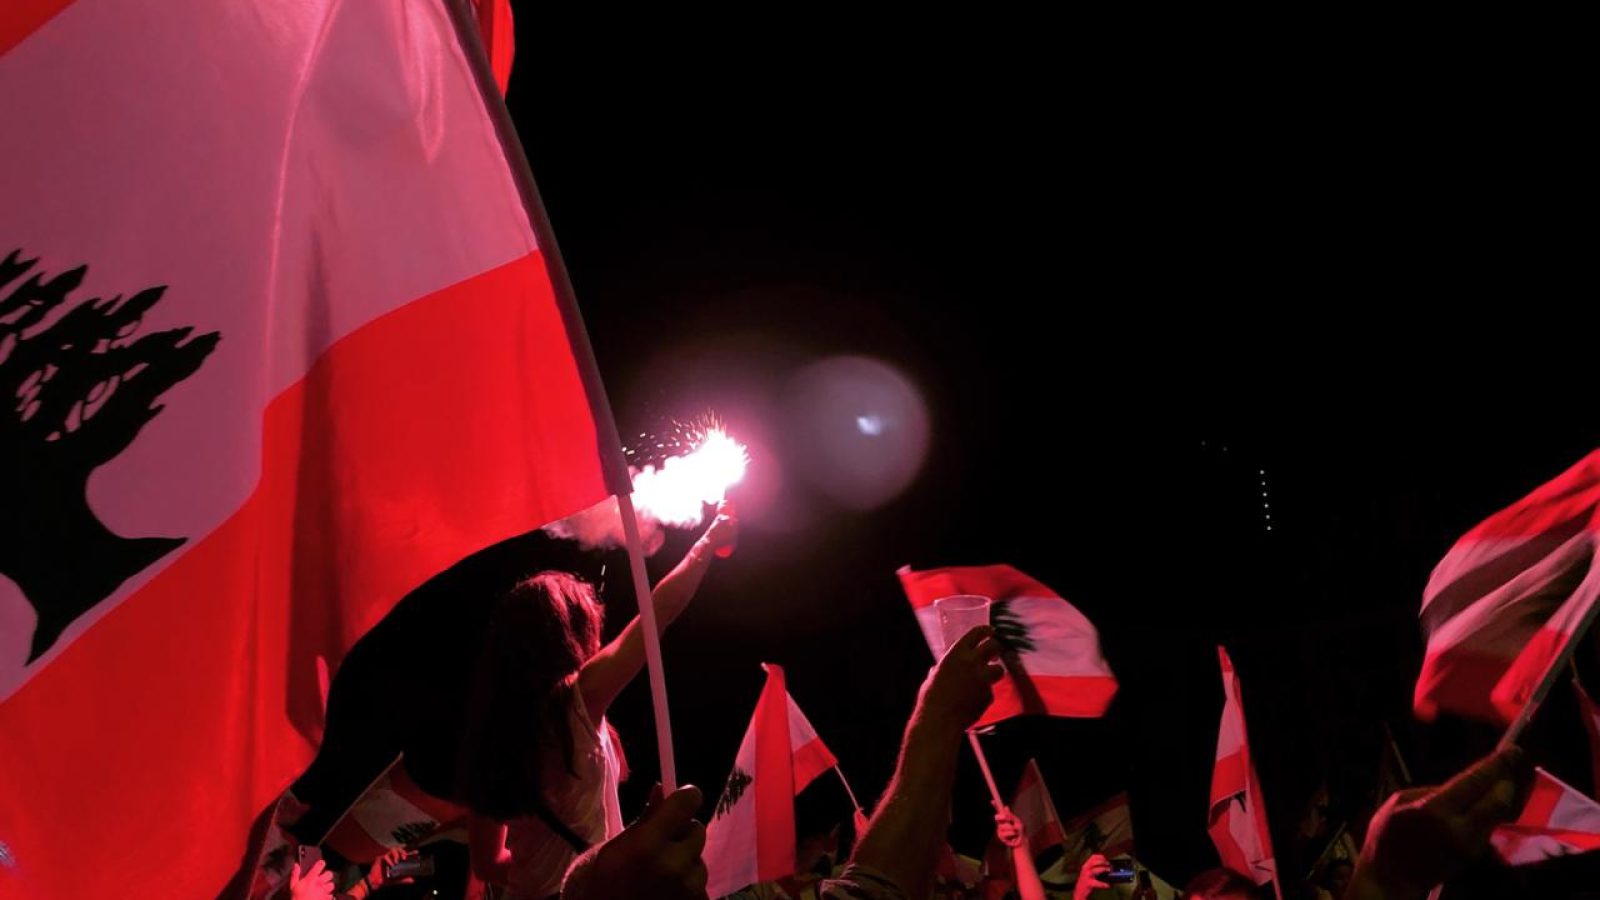 Flare shines light in group of passionate Lebanese protesters. Flags can be seen.